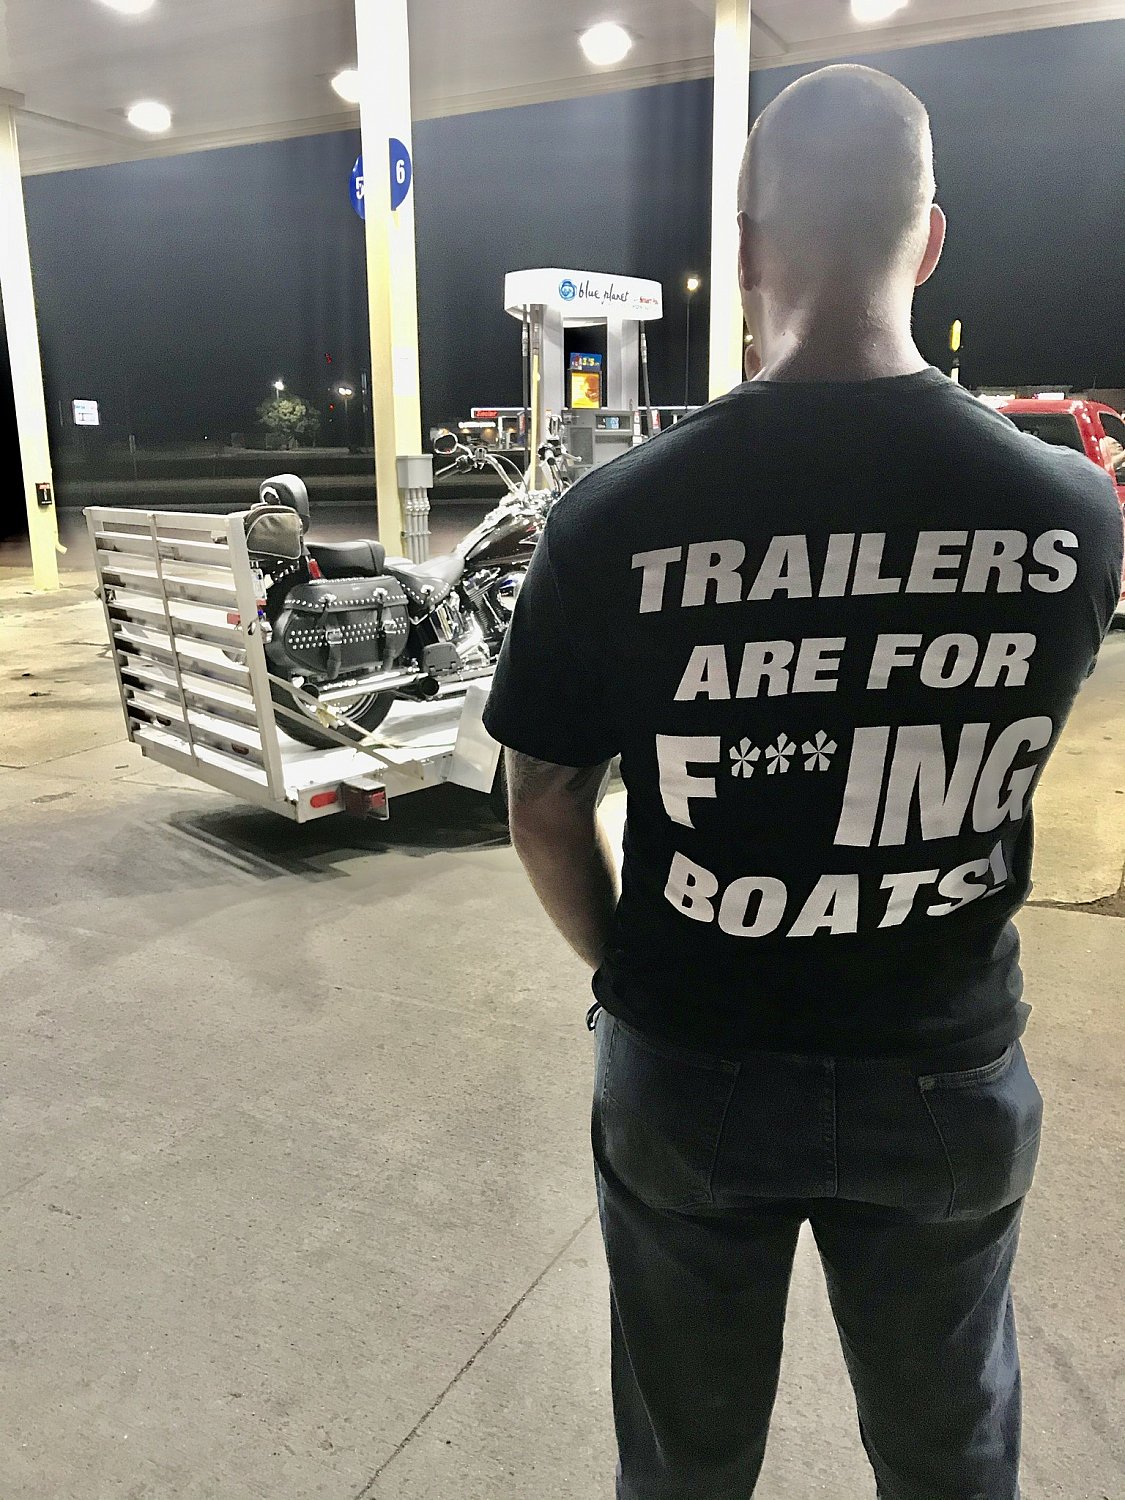 Trailers are for F***ING Boats! | boats.jpeg